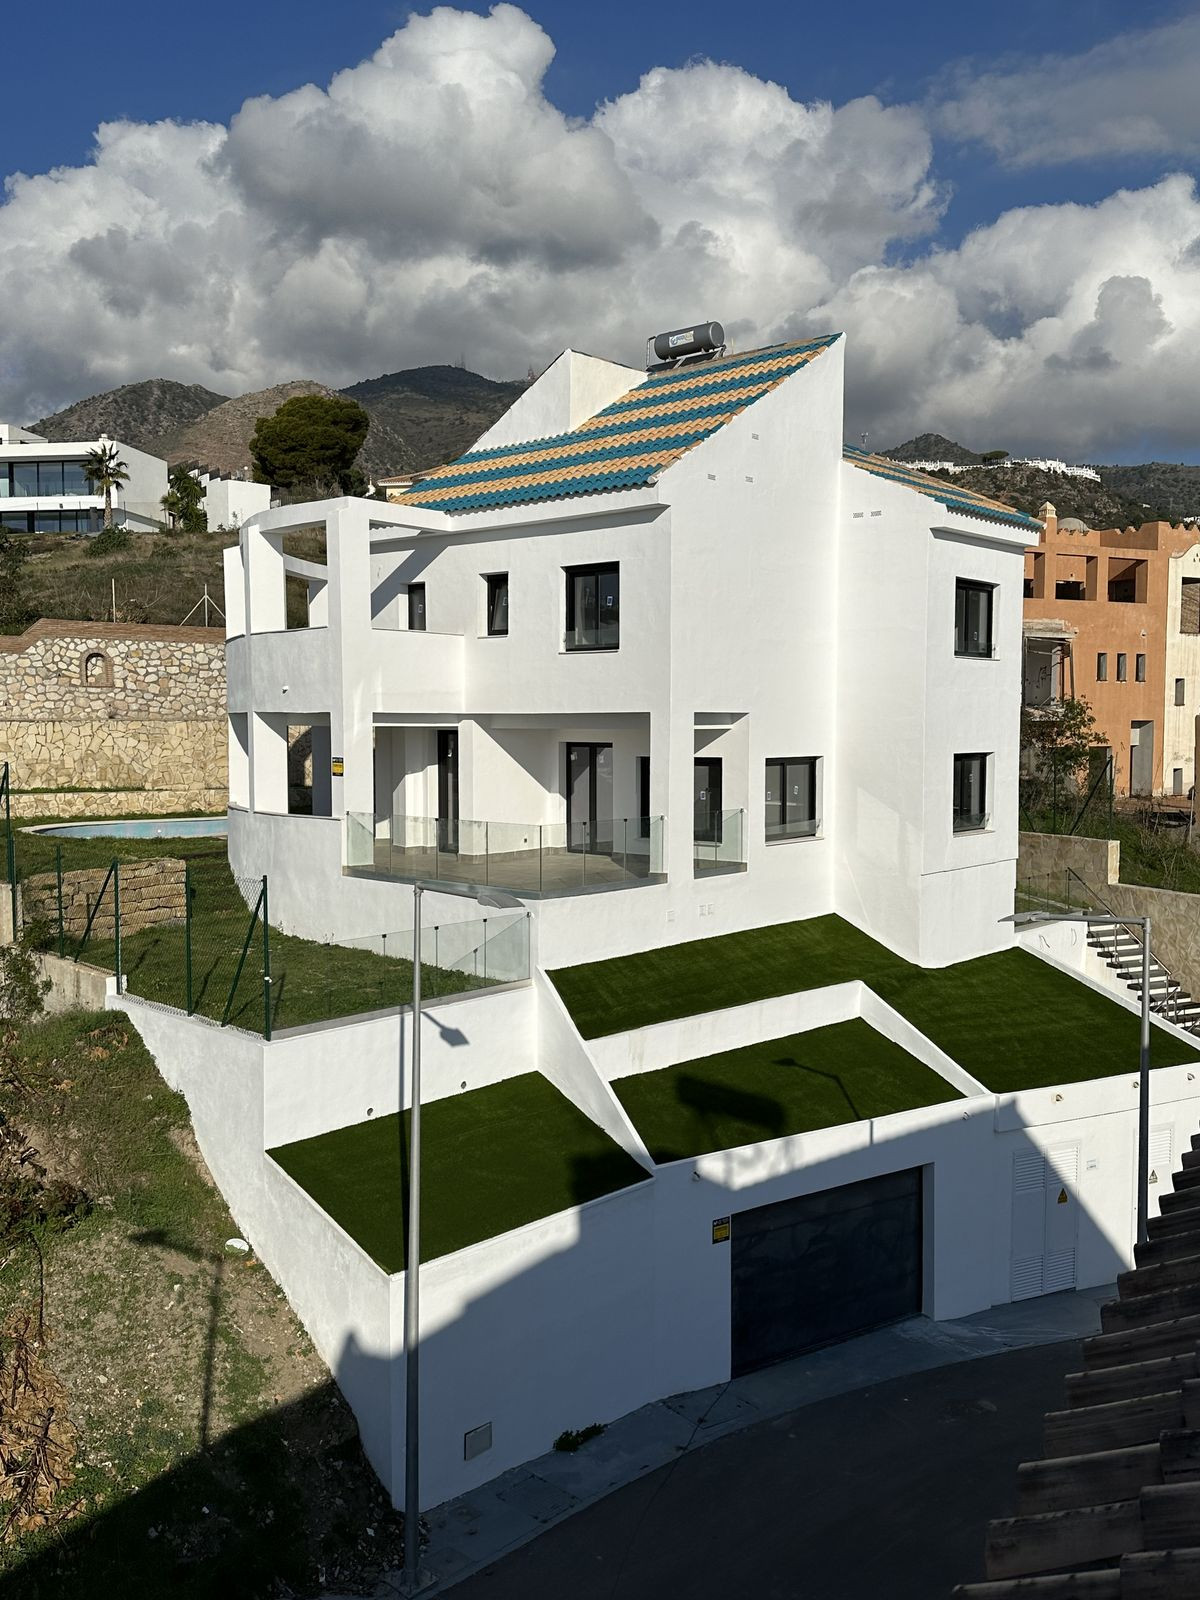 Villa in the final stage of construction, located only a two minutes walk away from the beach.

In t, Spain